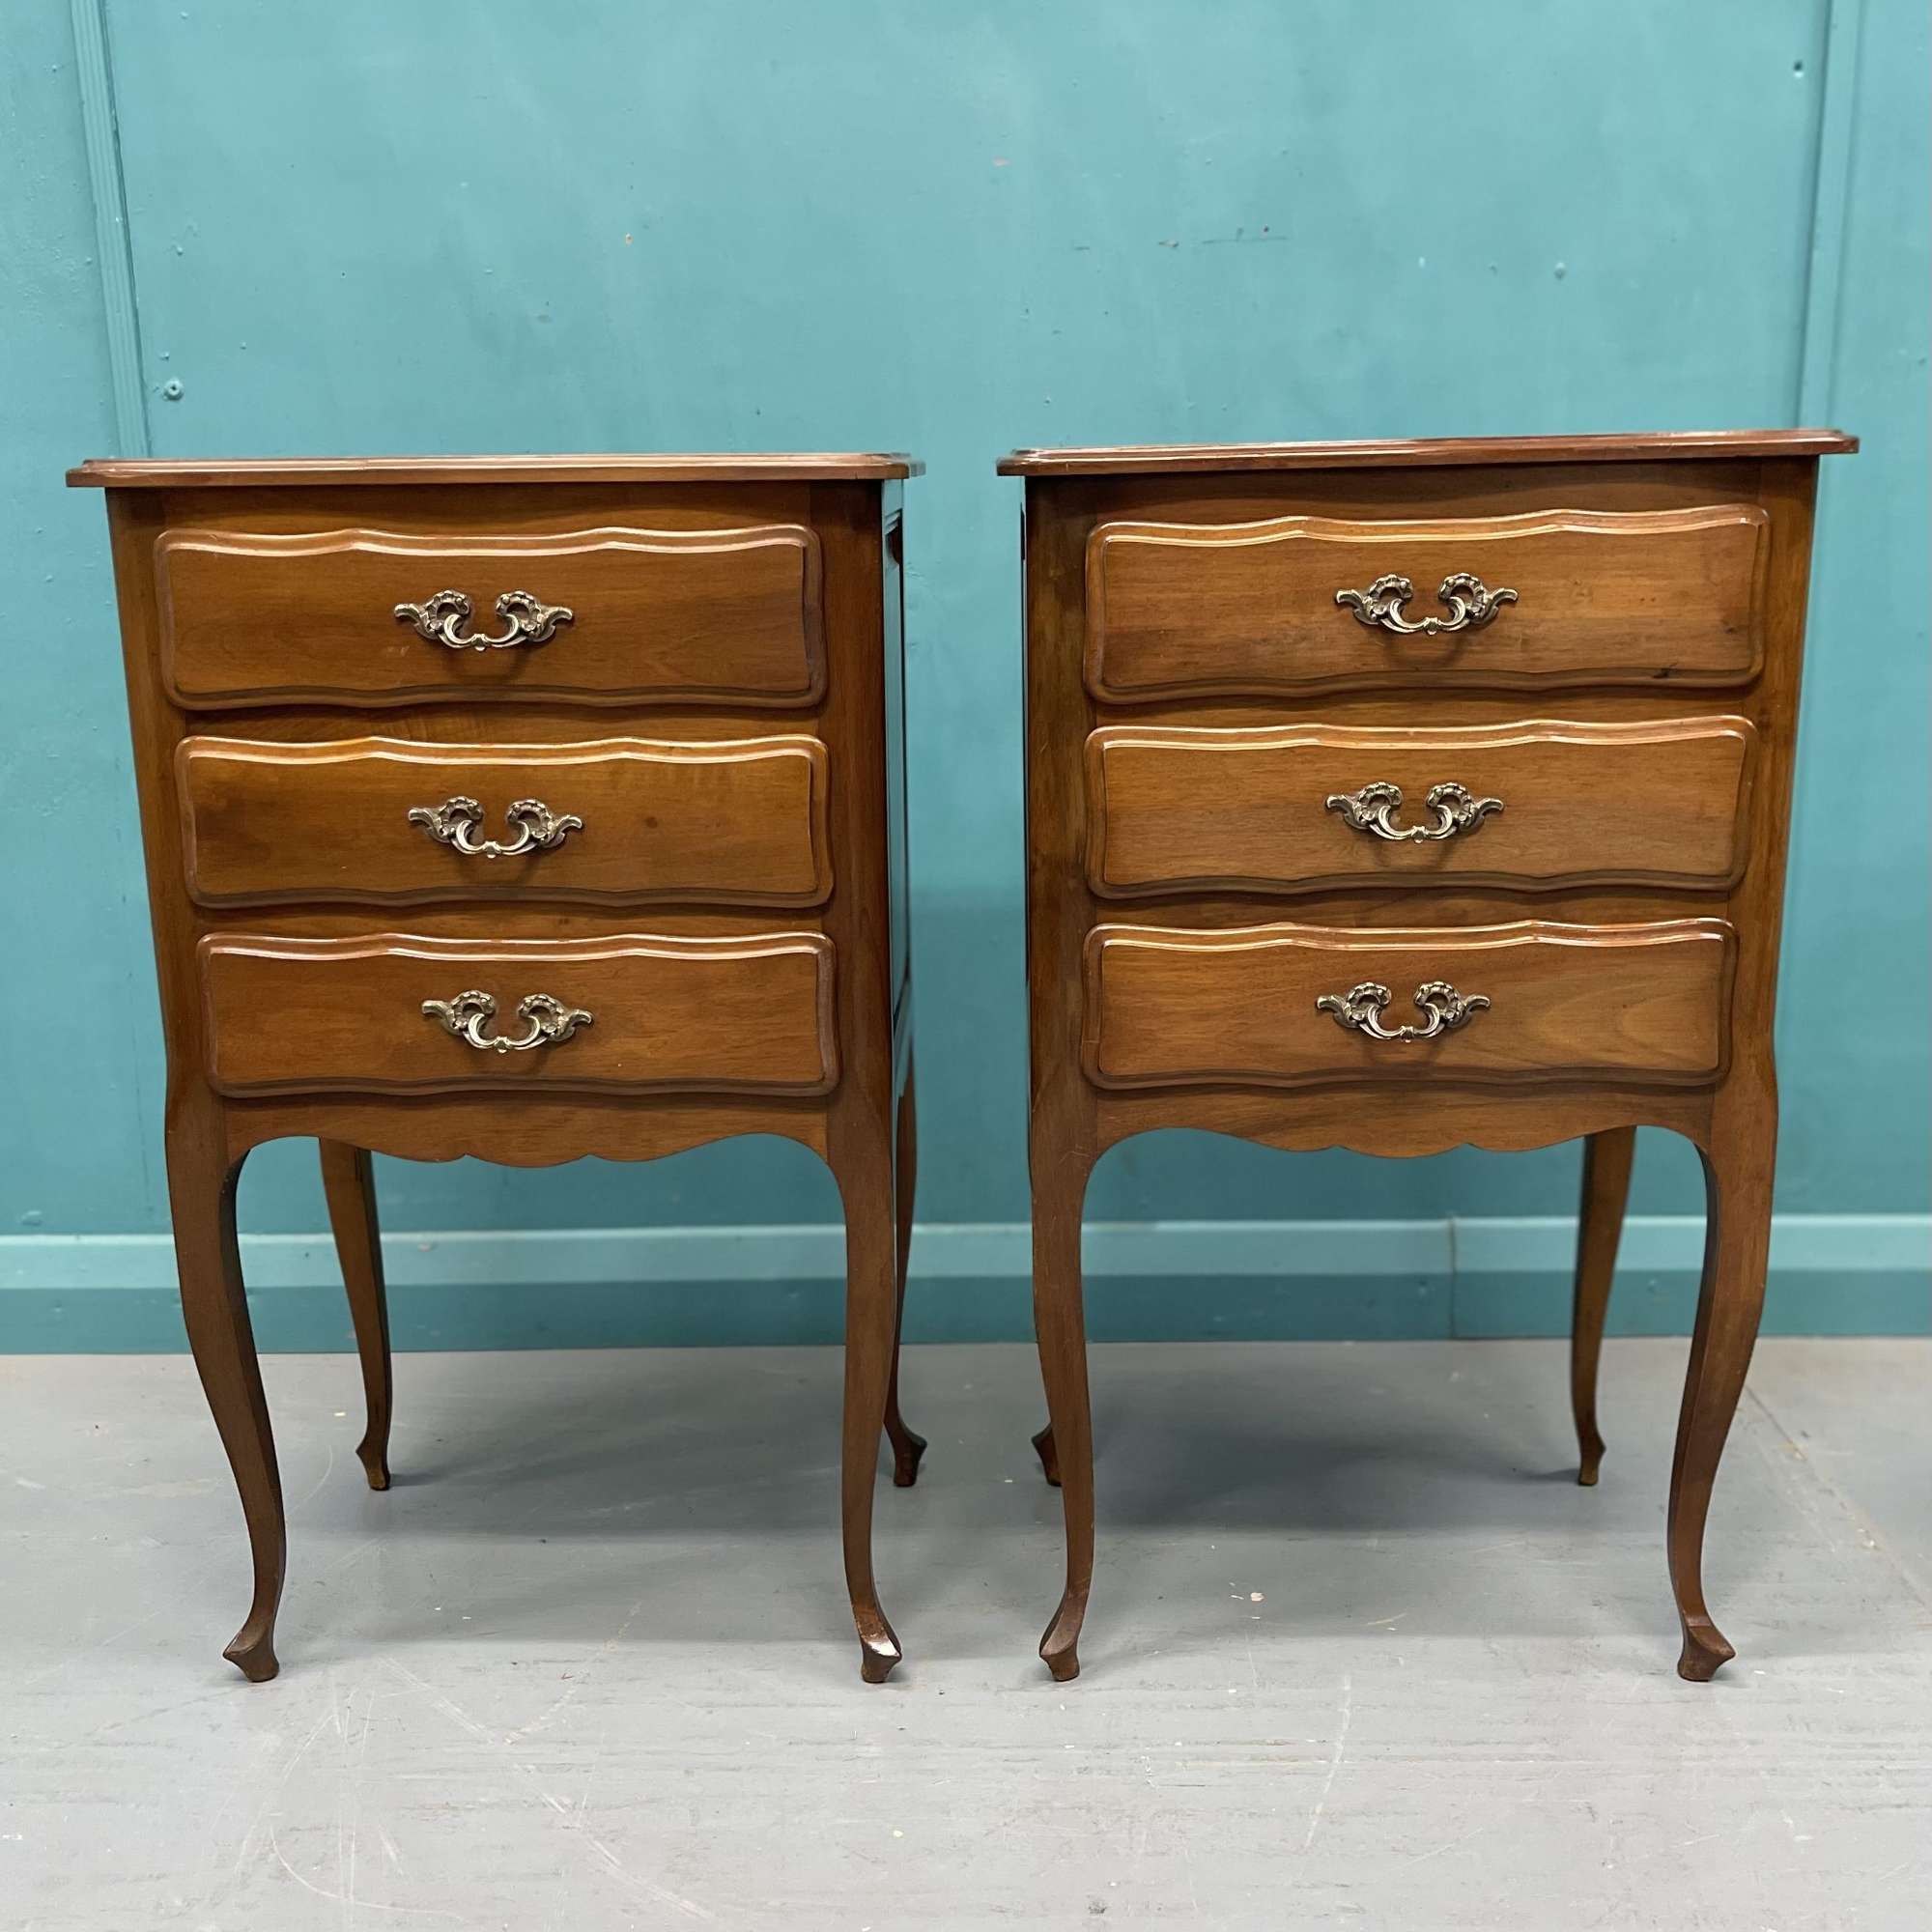 Pair of French cherrywood bedside tables